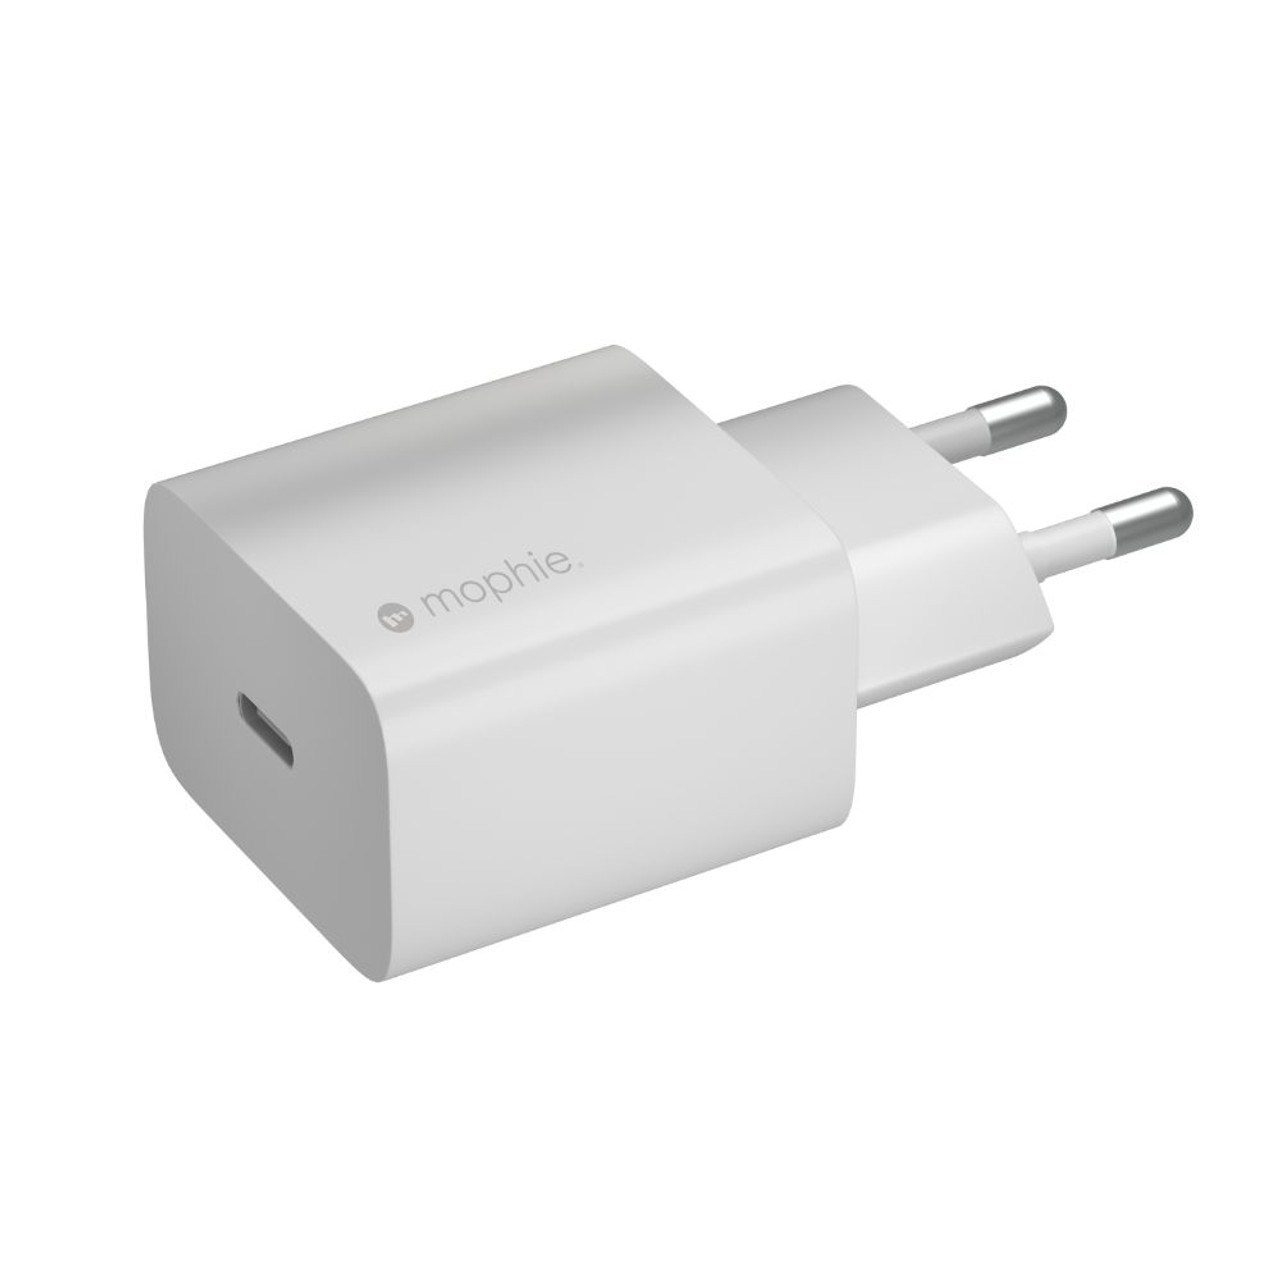 Shop mophie USB-C PD Wall Adapter for EU at